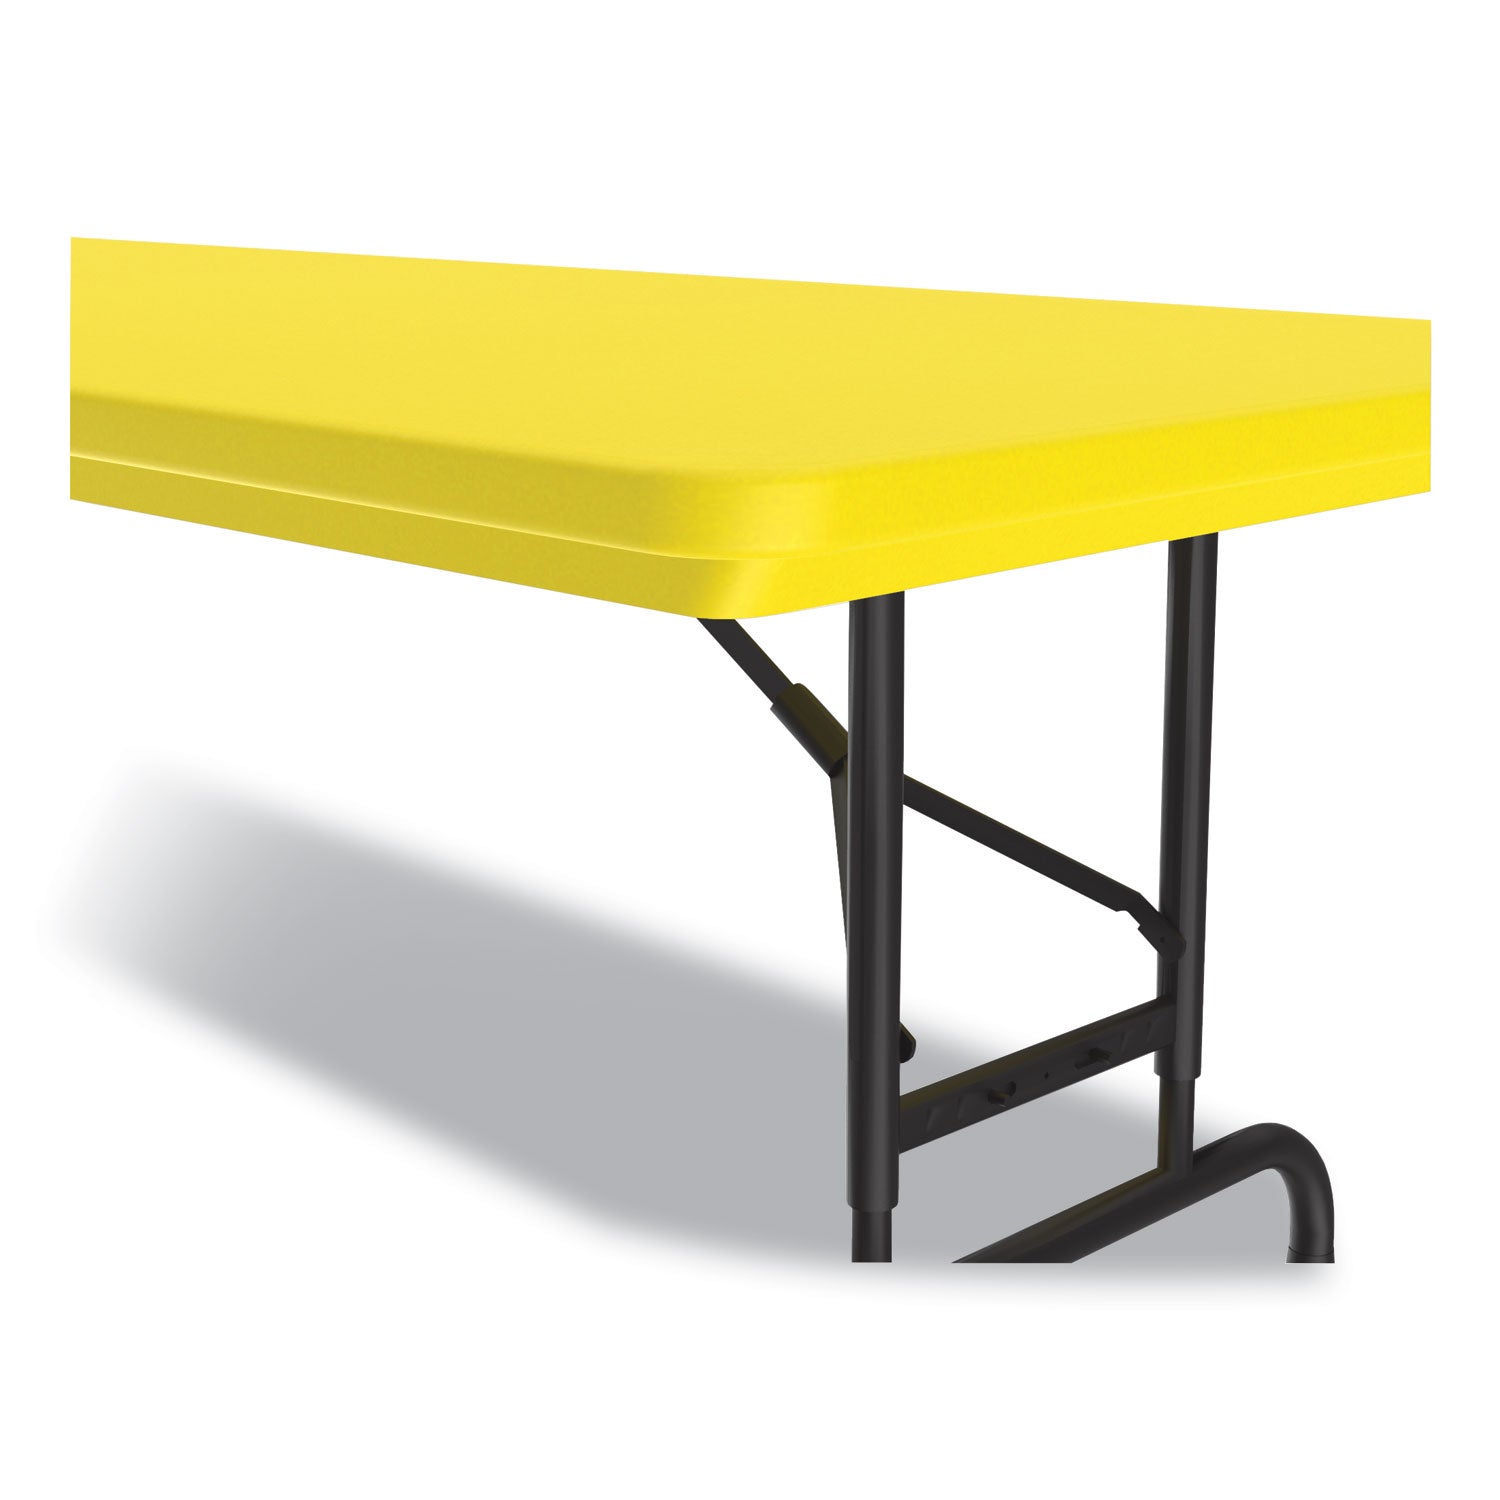 adjustable-folding-tables-rectangular-60-x-30-x-22-to-32-yellow-top-black-legs-4-pallet-ships-in-4-6-business-days_crlra3060284p - 7